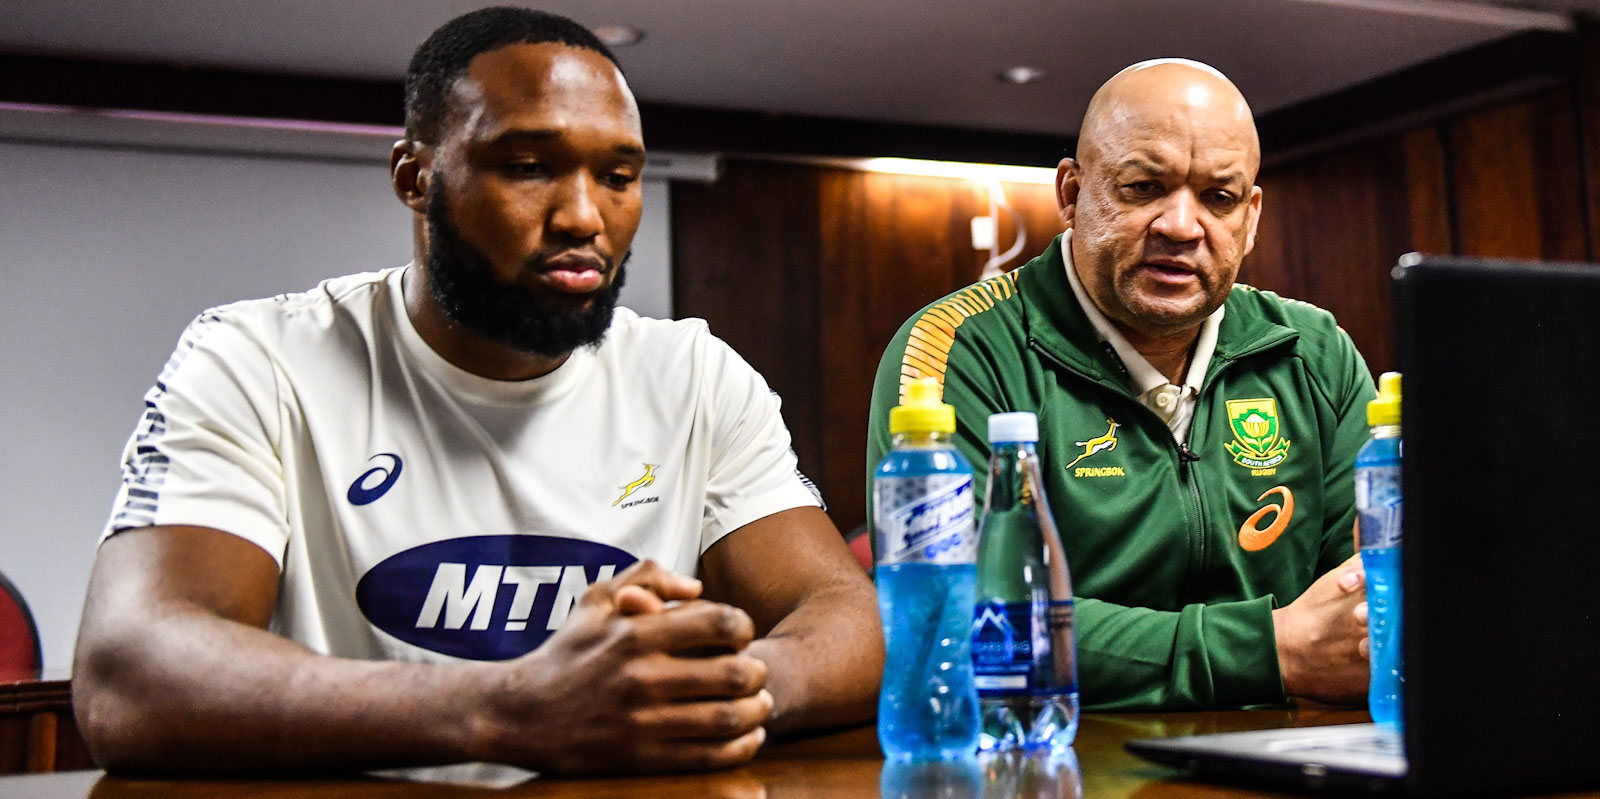 Gold captain and coach, Lukhanyo Am (left) and Deon Davids, "face" the media.